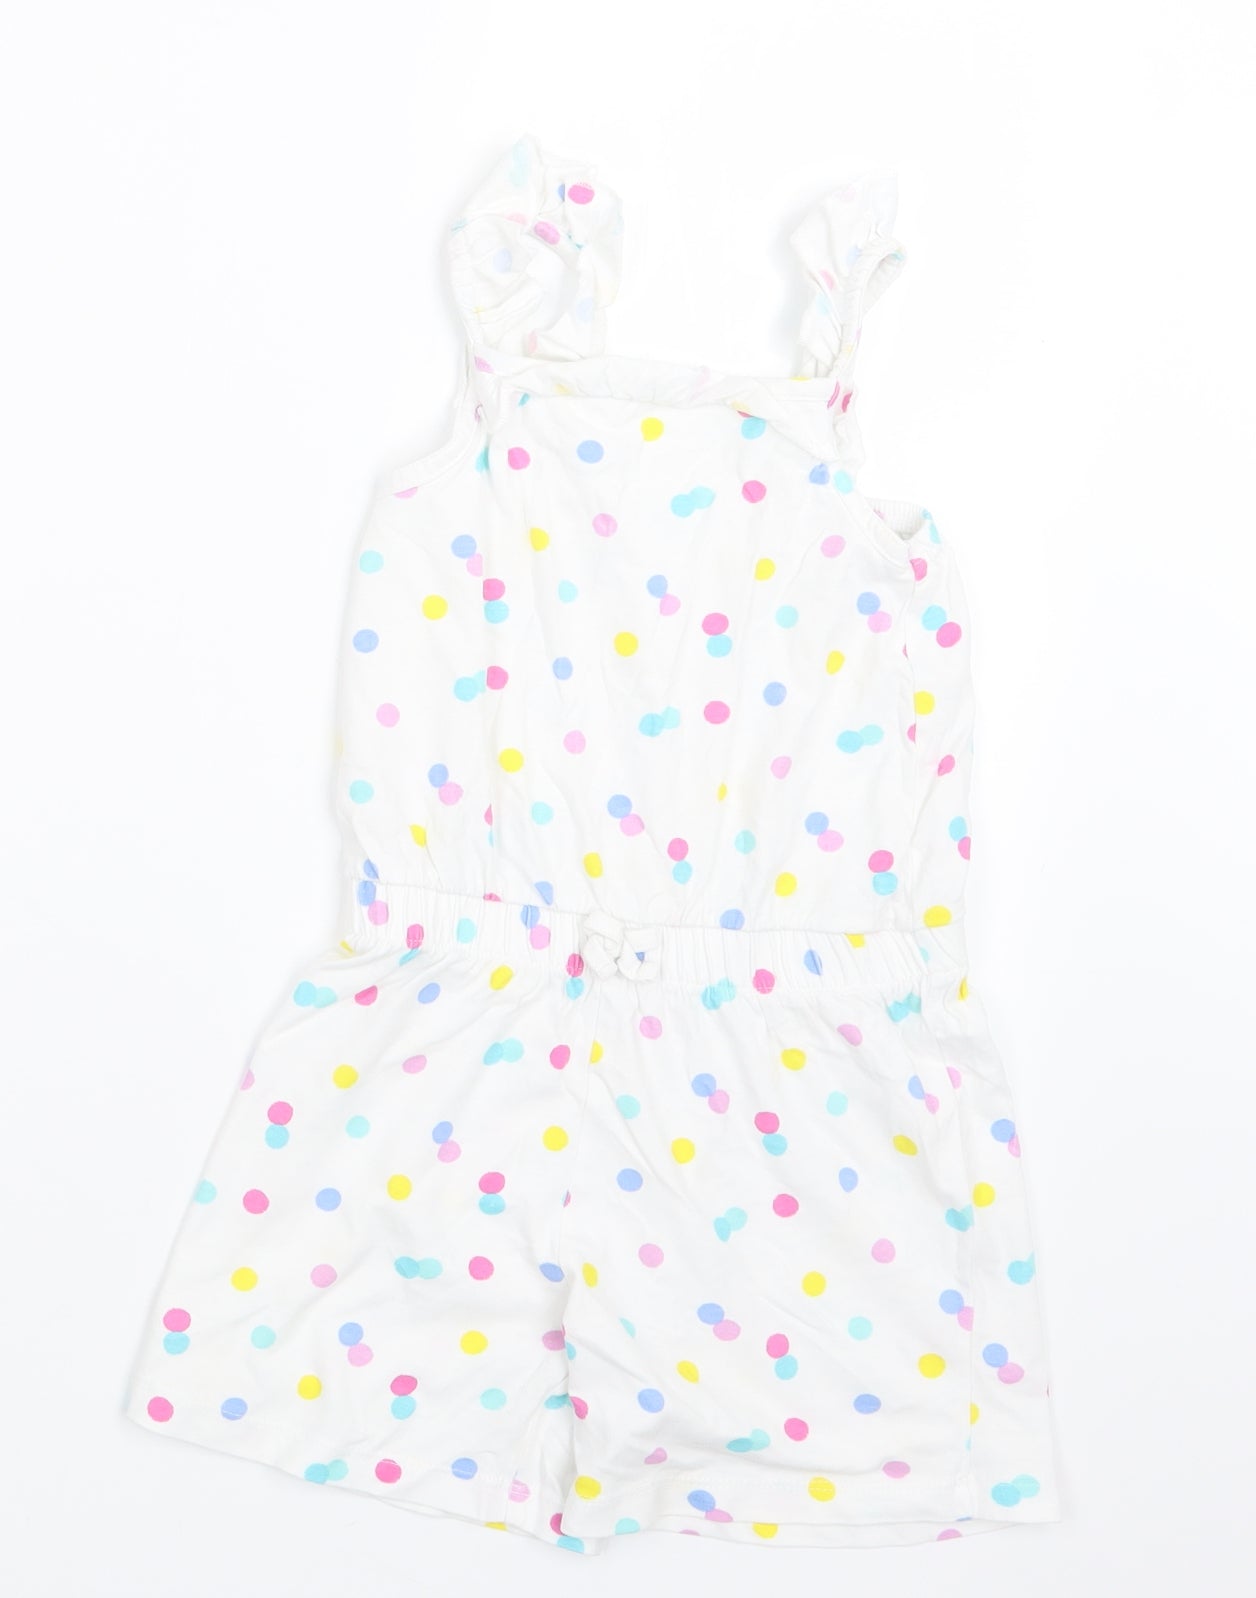 George Girls White Polka Dot  Playsuit One-Piece Size 5-6 Years